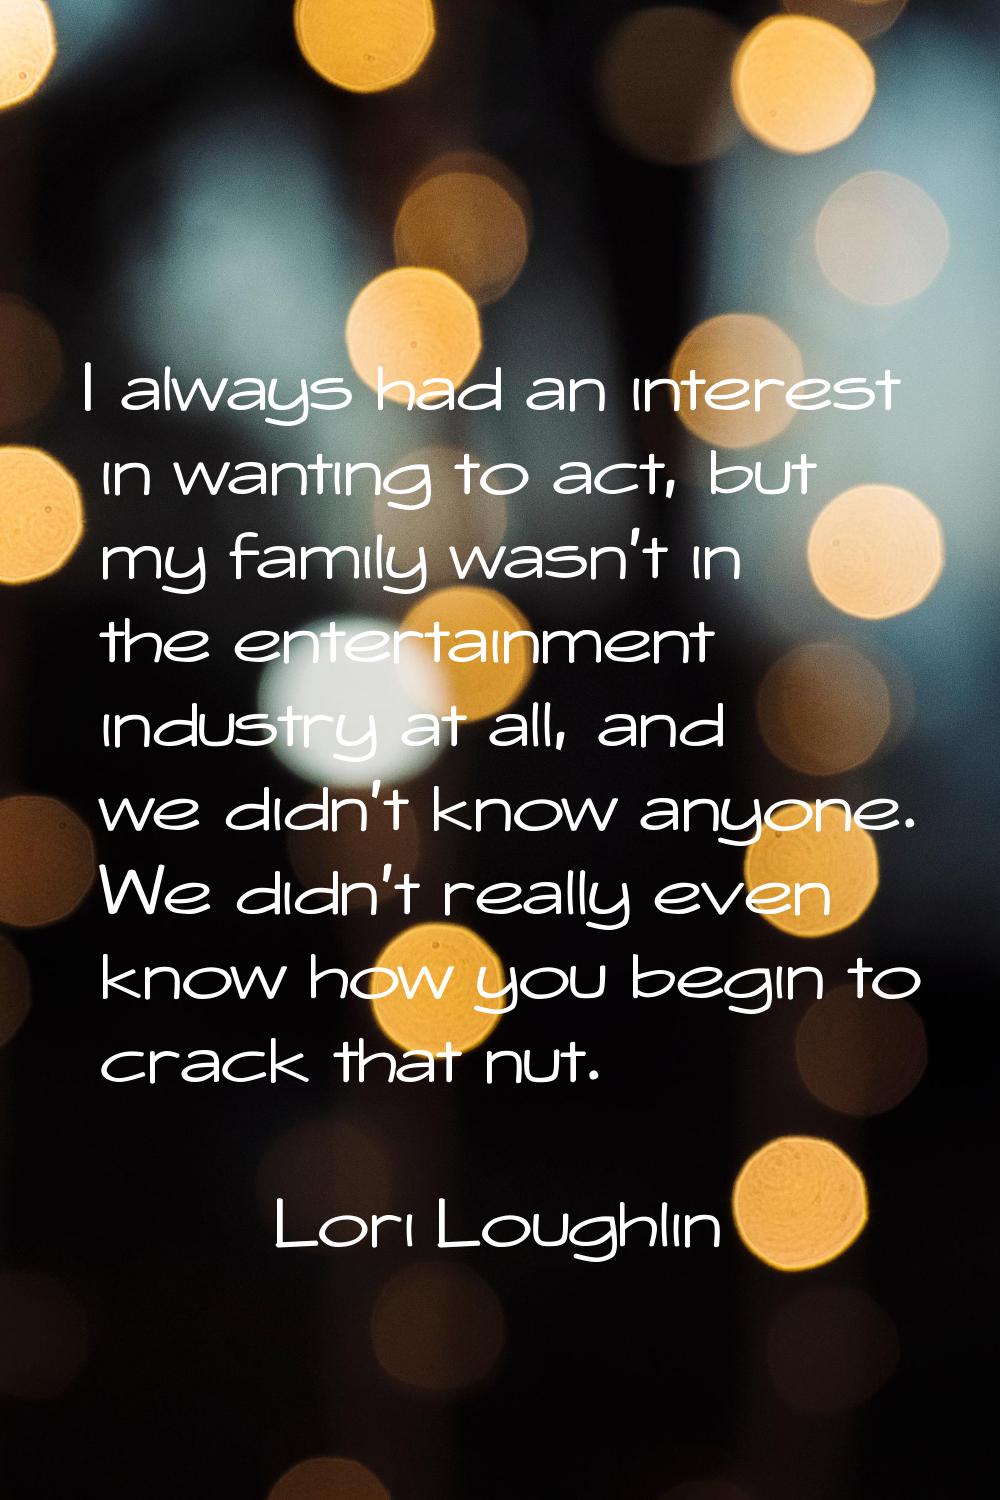 I always had an interest in wanting to act, but my family wasn't in the entertainment industry at a